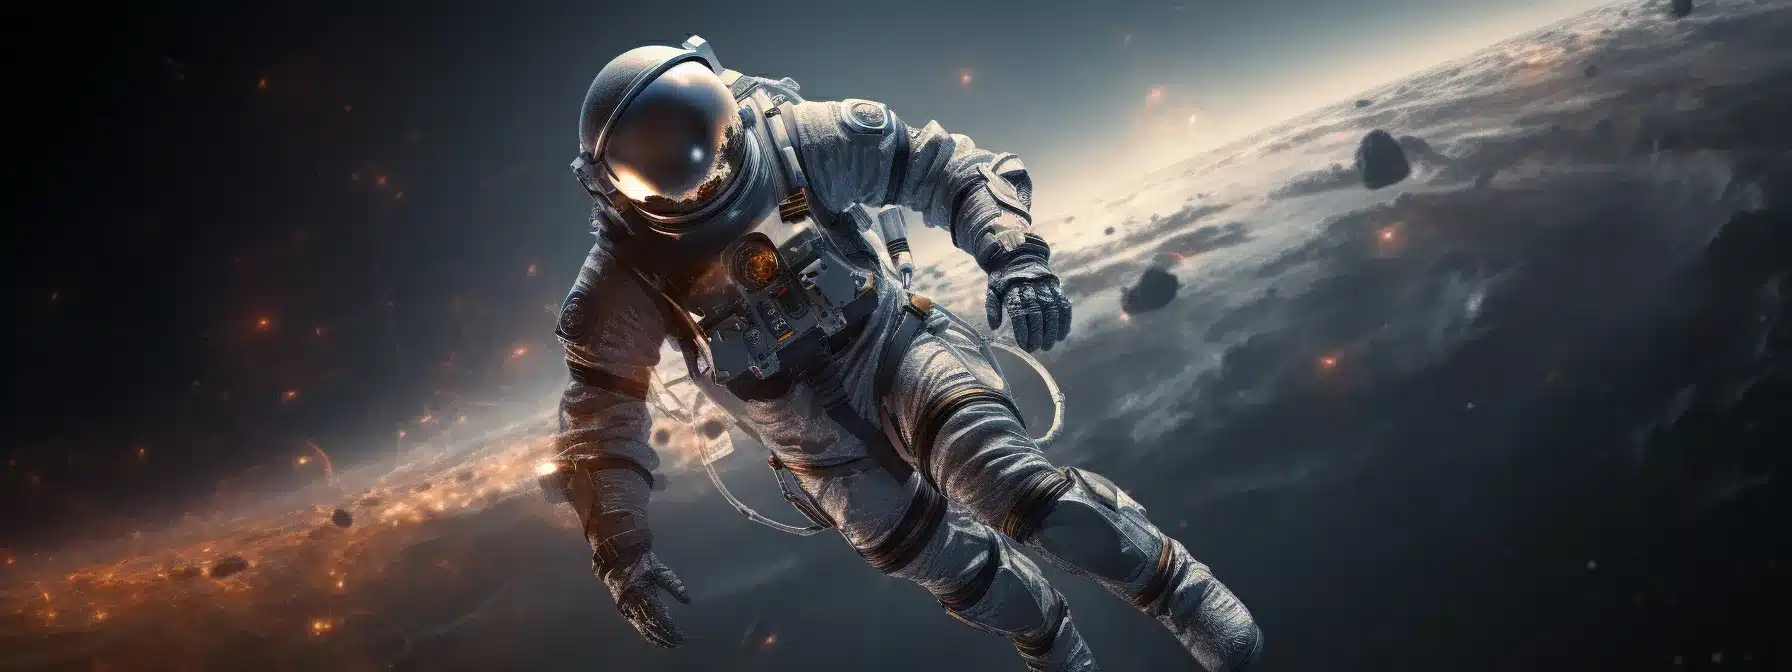 An Astronaut Soaring Through A Galaxy, Guided By Digital Lights And Propelled Forward By The Winds Of Ai And Automation, Towards Market Pioneers And Thought Leaders, While Being Drawn Towards The Paramountcy Of Customer Experience.